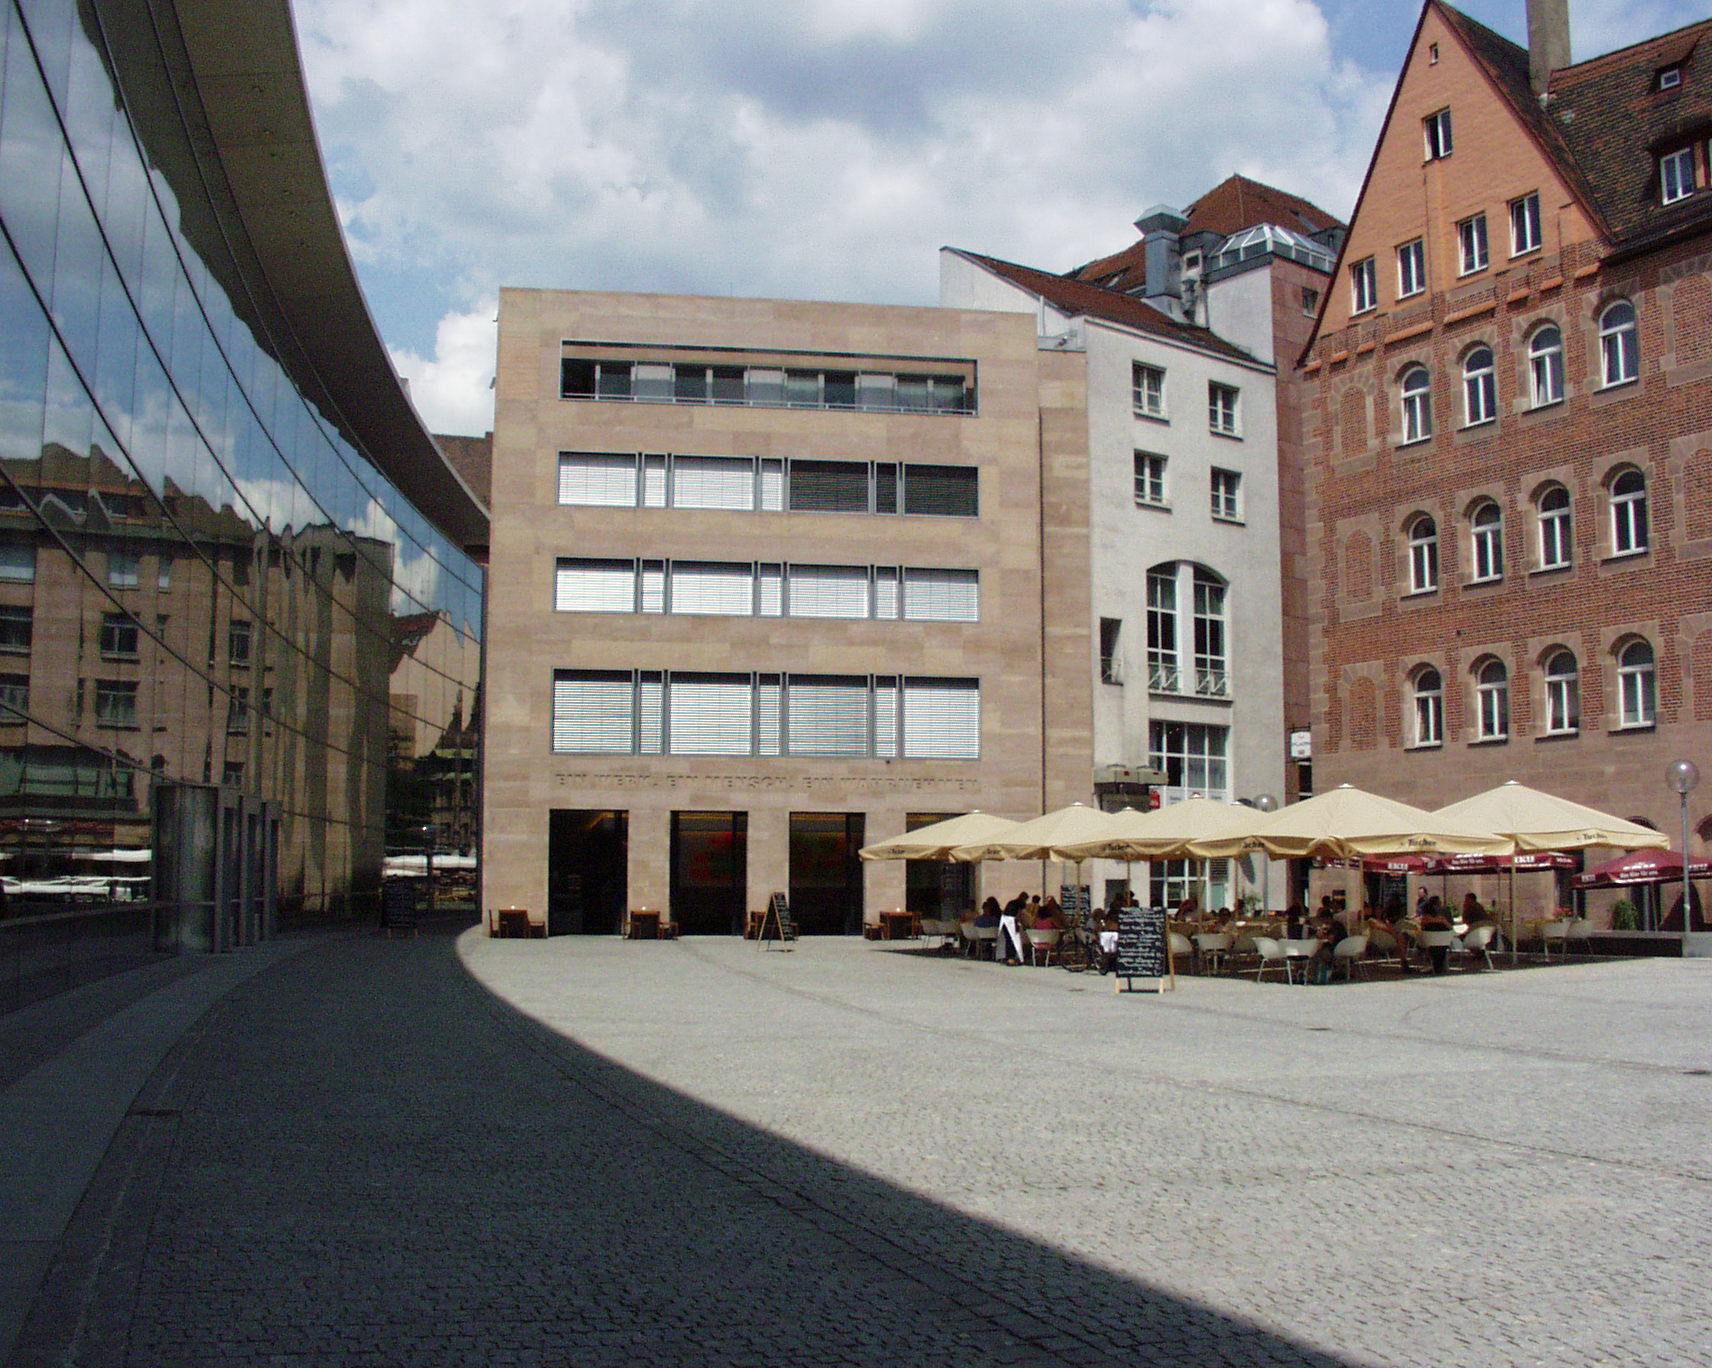 Exterior view of Neues Museum Nuremberg by day: Klarissenplatz with brick building, glass front of the museum on the left, other buildings and sunshades on the right.